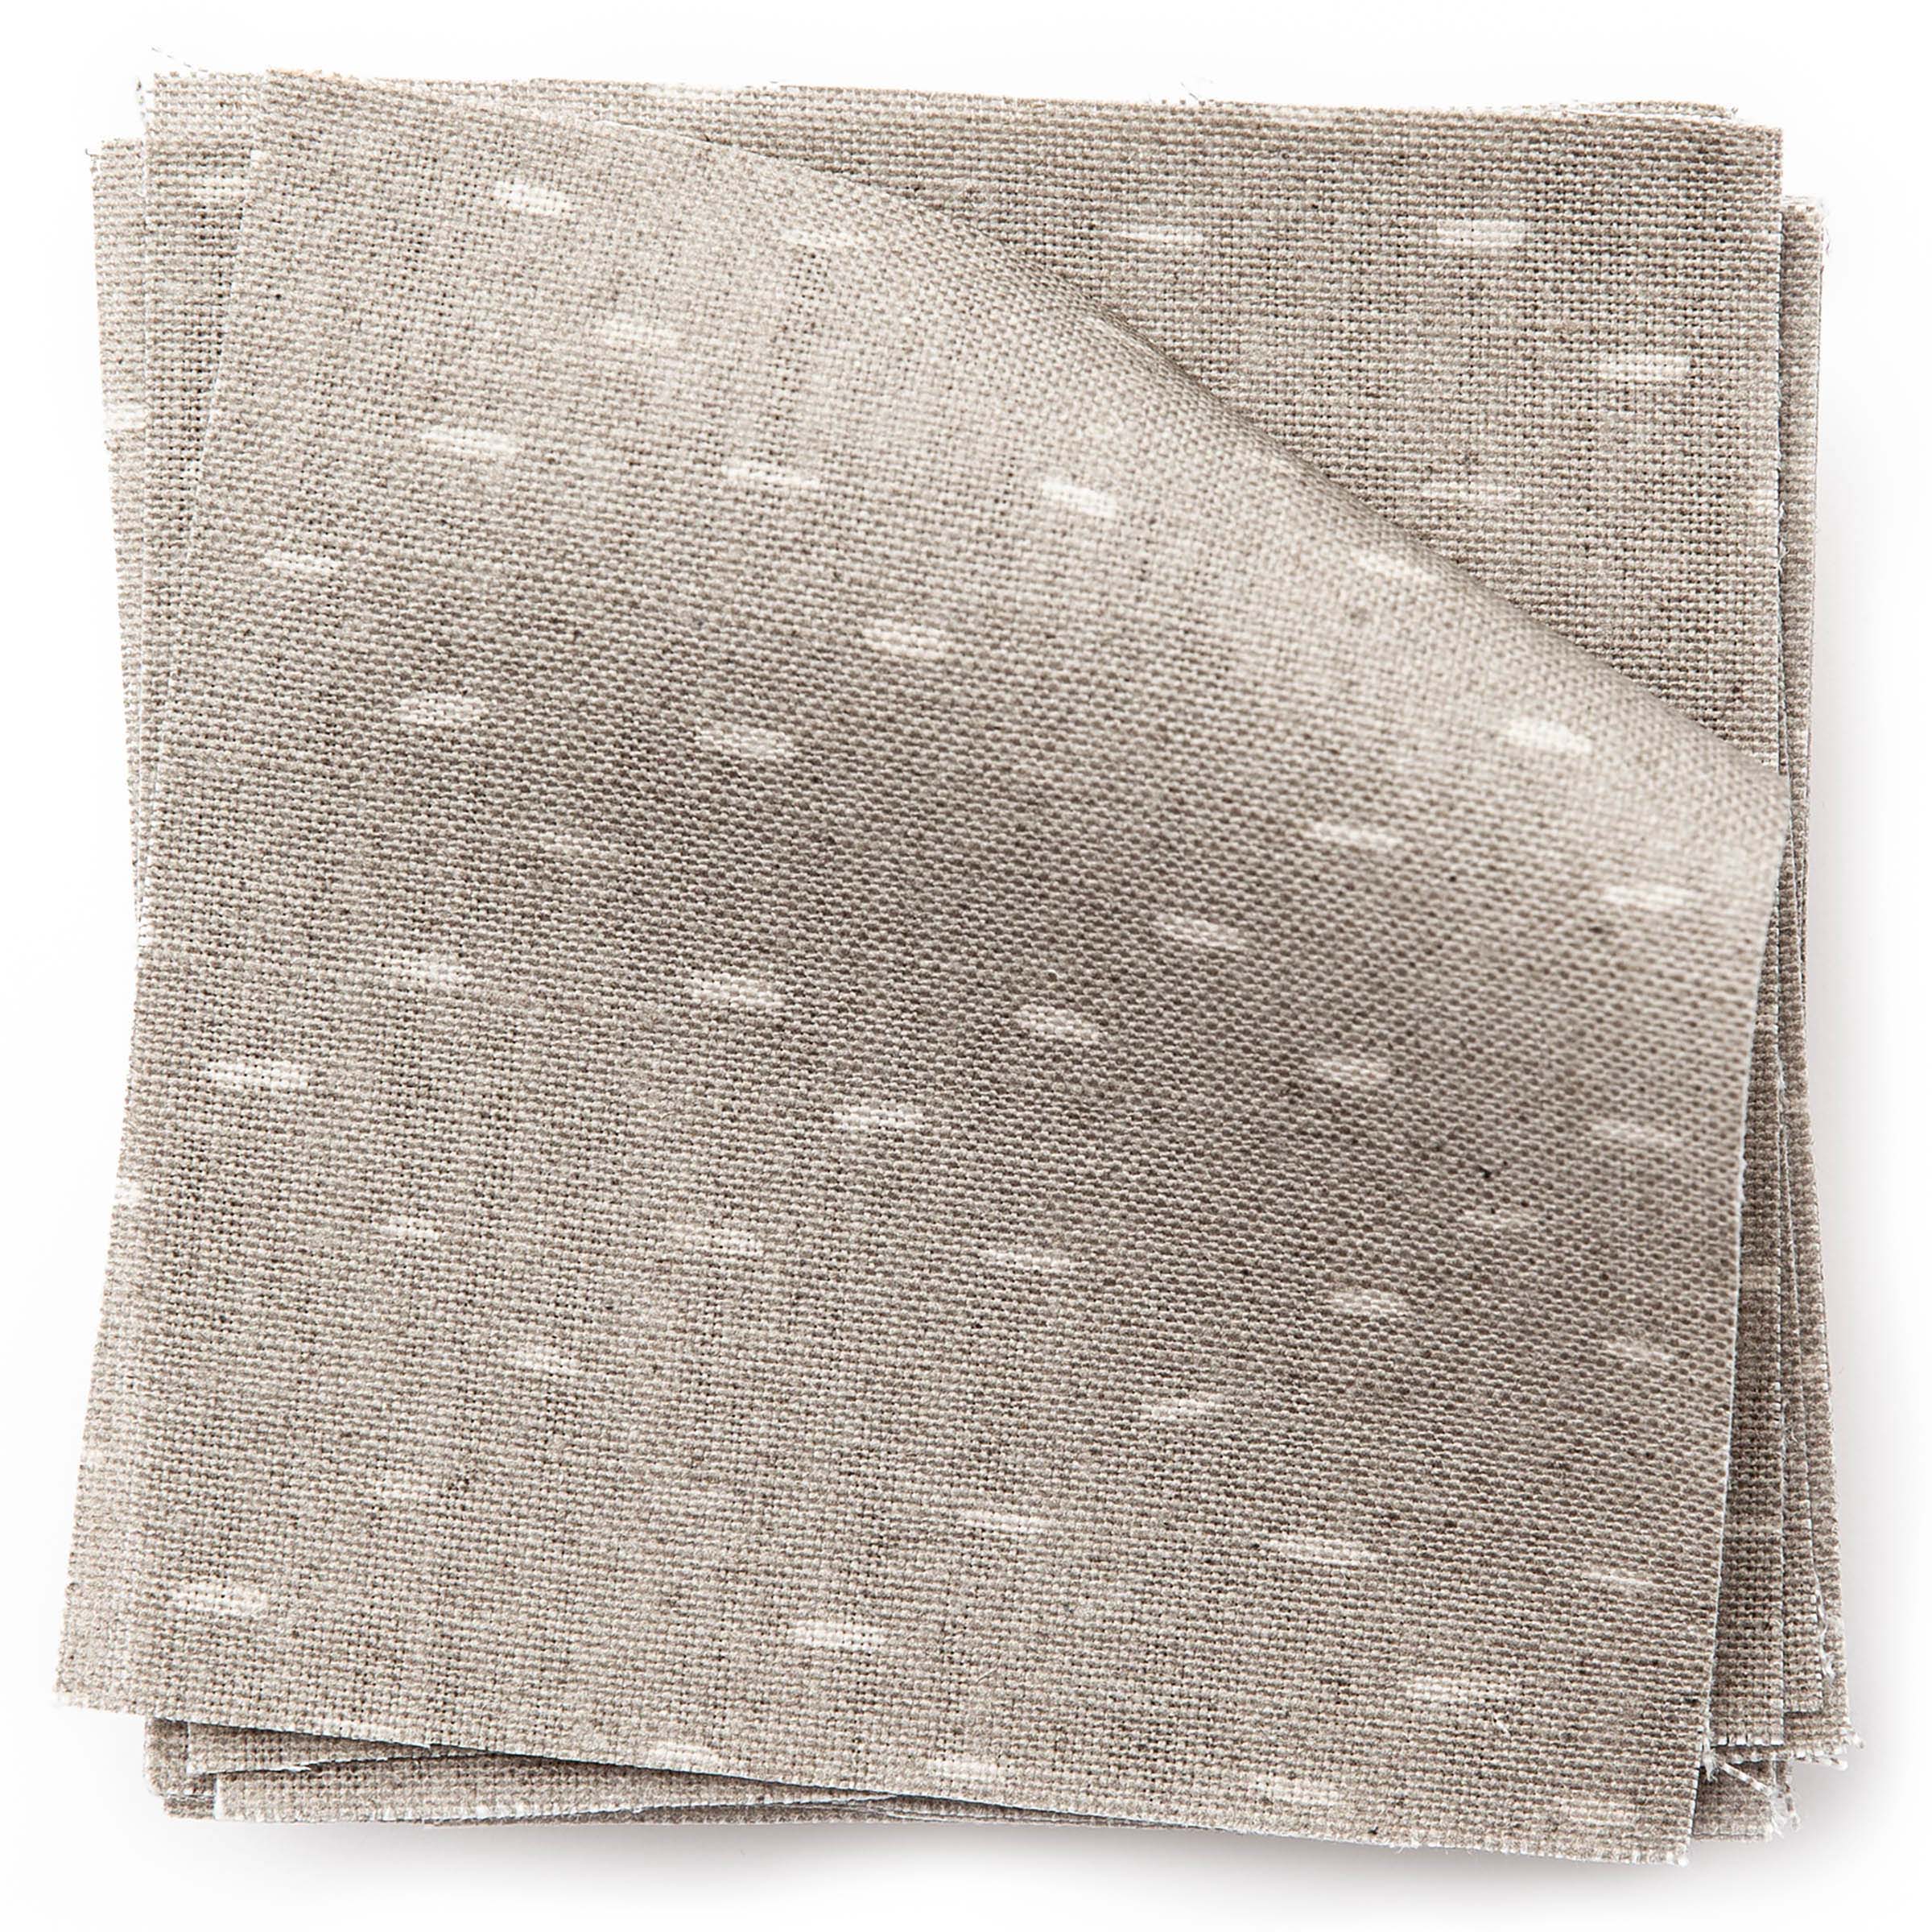 A stack of fabric swatches in a dotted diamond grid in cream on a light brown field.